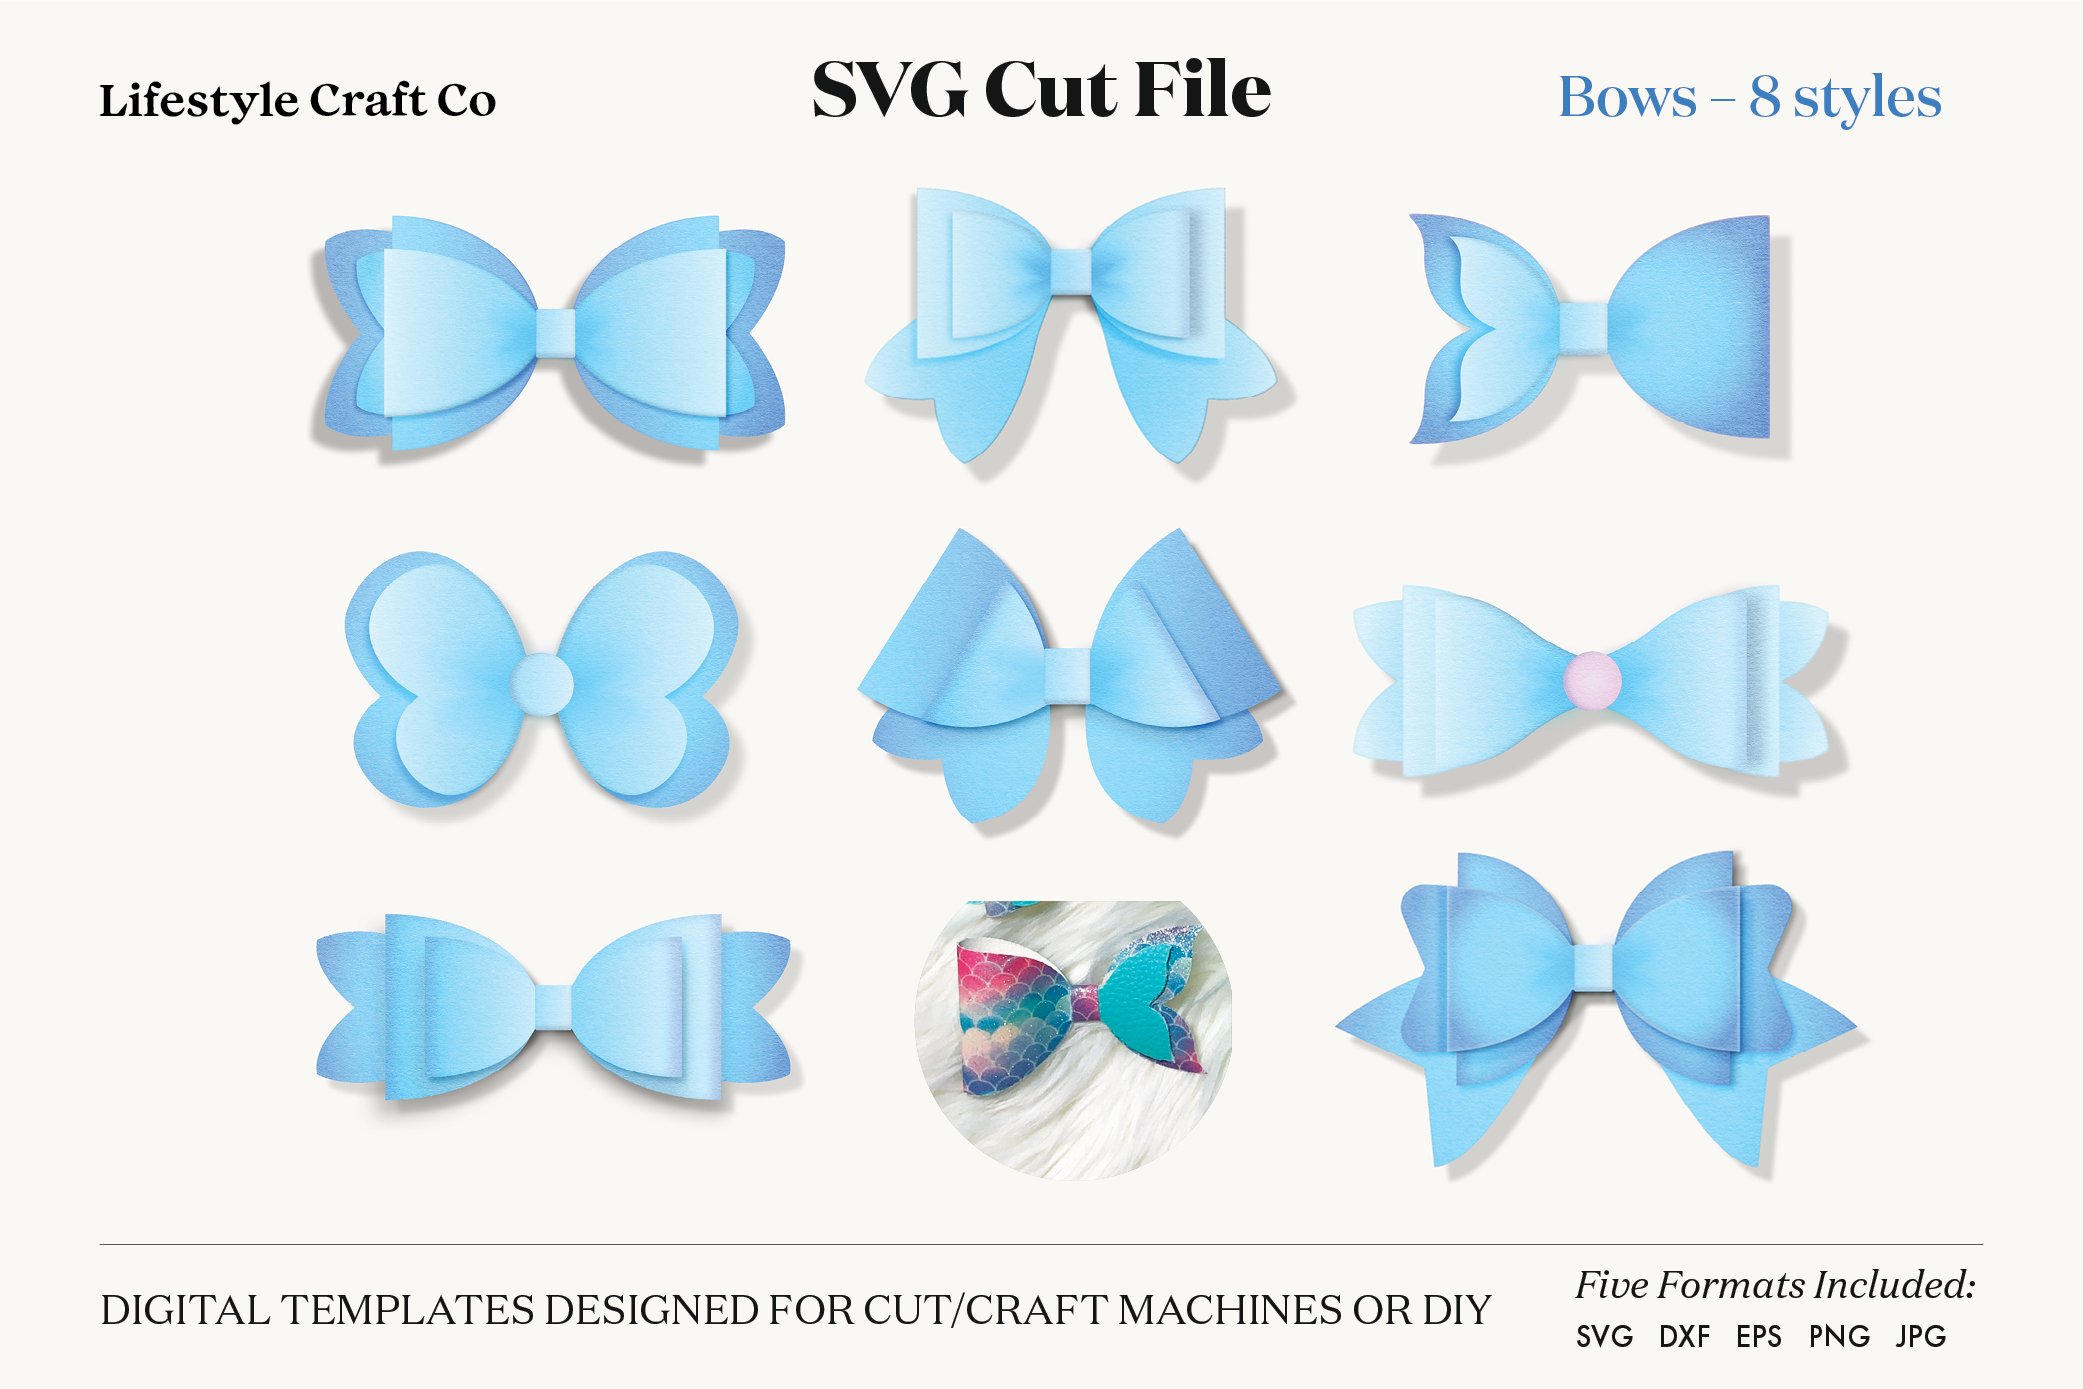 Bows in the different shapes.